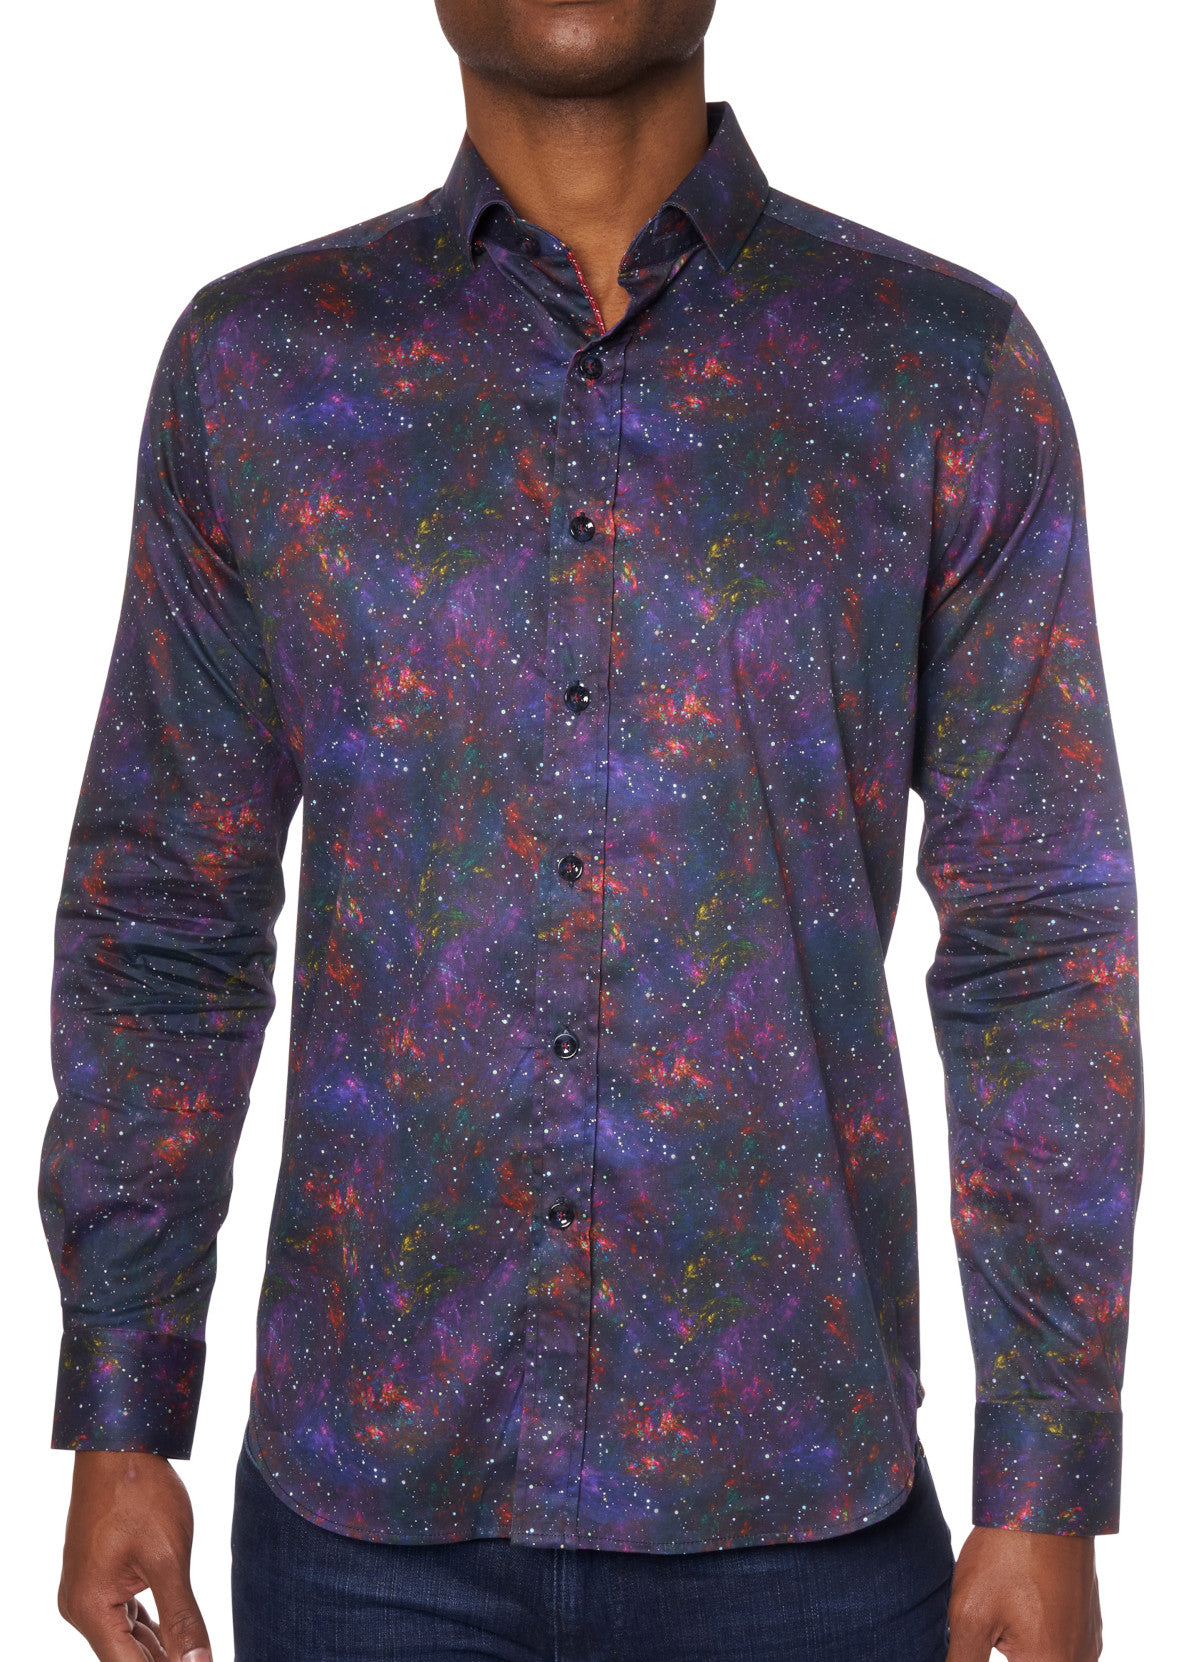 In true Robert Graham fashion, the celestial motif shirt in black with an aura of colors is certainly unique. Whether you pair this shirt with any color jeans or a pant, the style is fashion forward and sure to get compliments.  Soft cotton fabric.  Tailored fit, is best for a medium build.